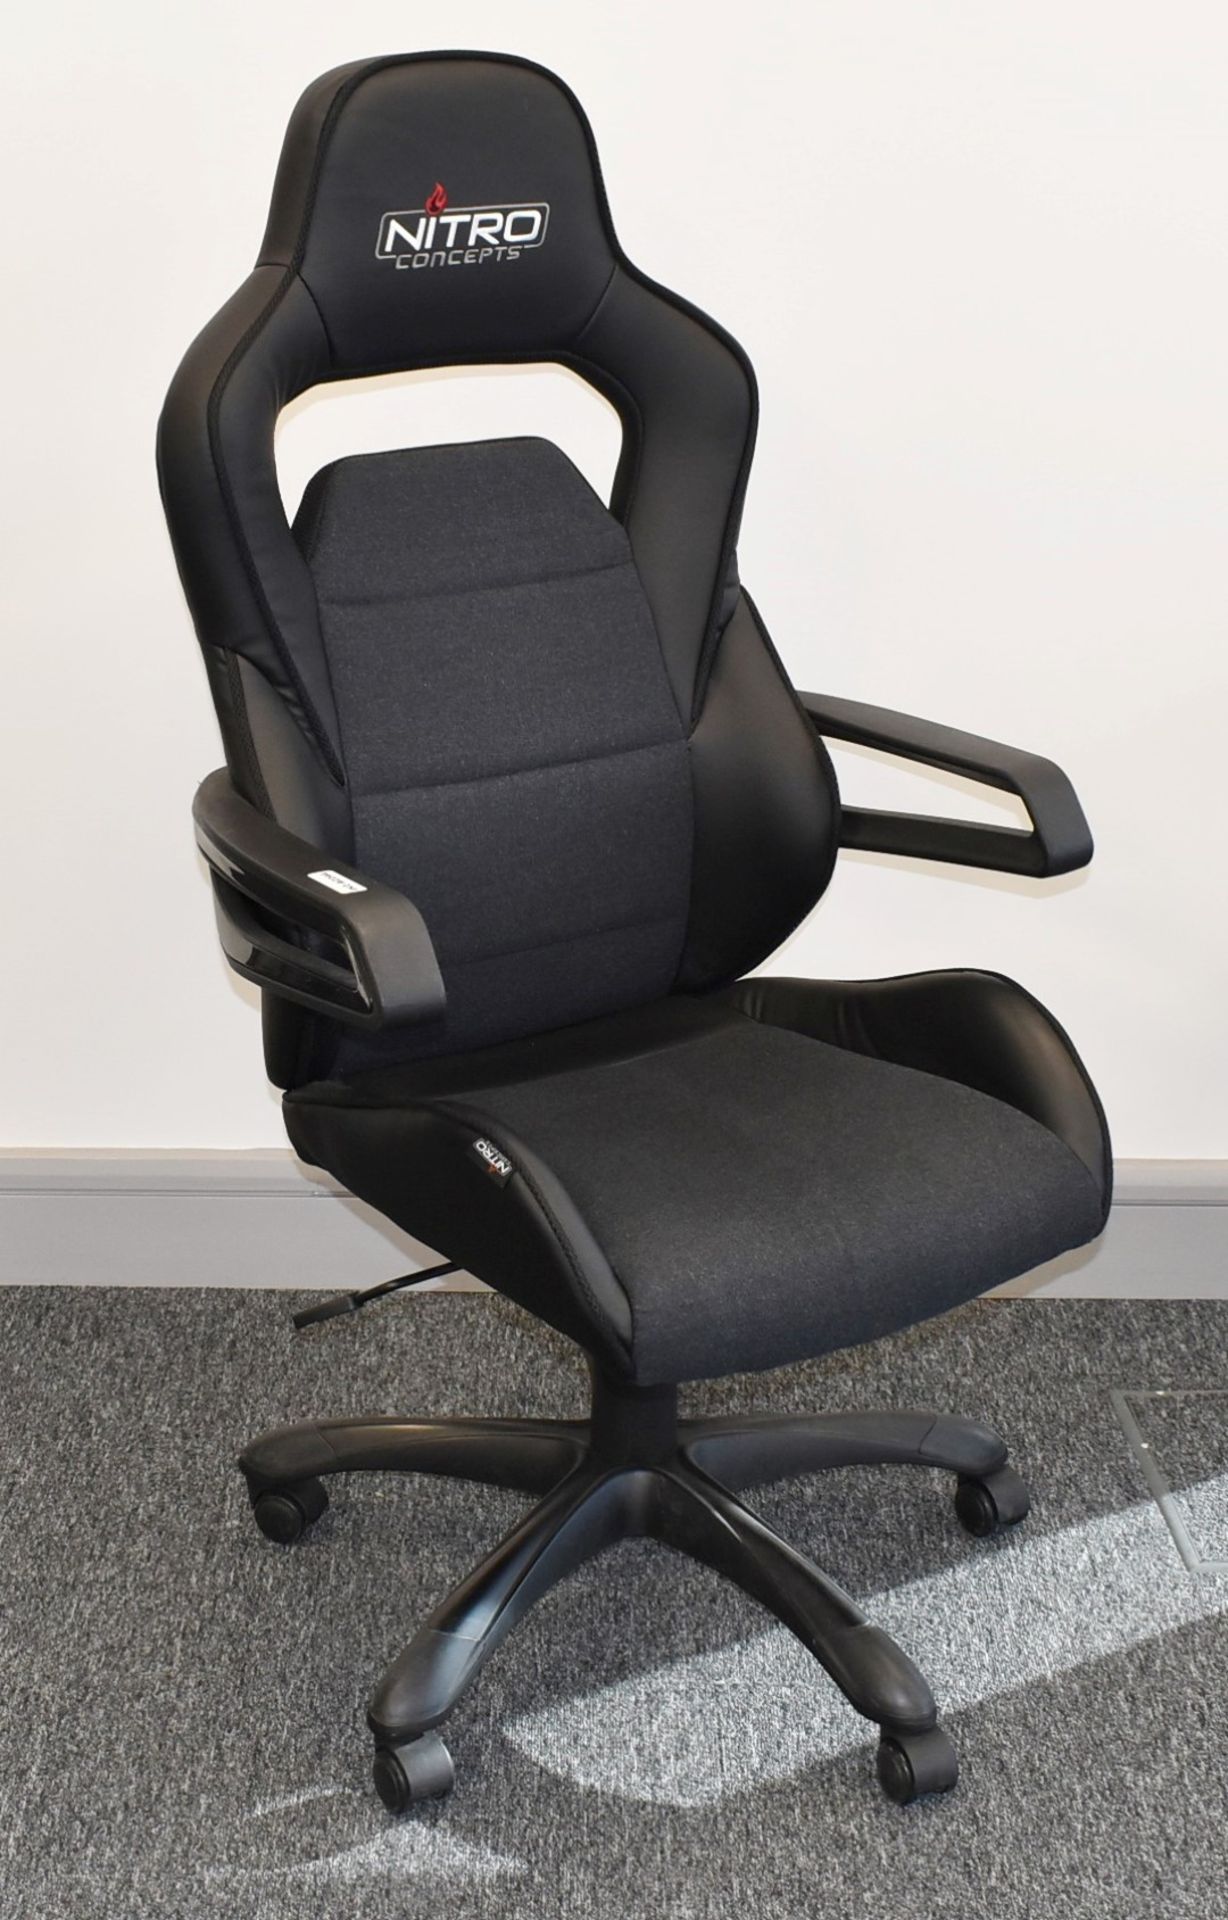 1 x Nitro Concepts Evo Gaming Swivel Chair - Faux Leather and Fabric Upholstery in Black - Image 4 of 9